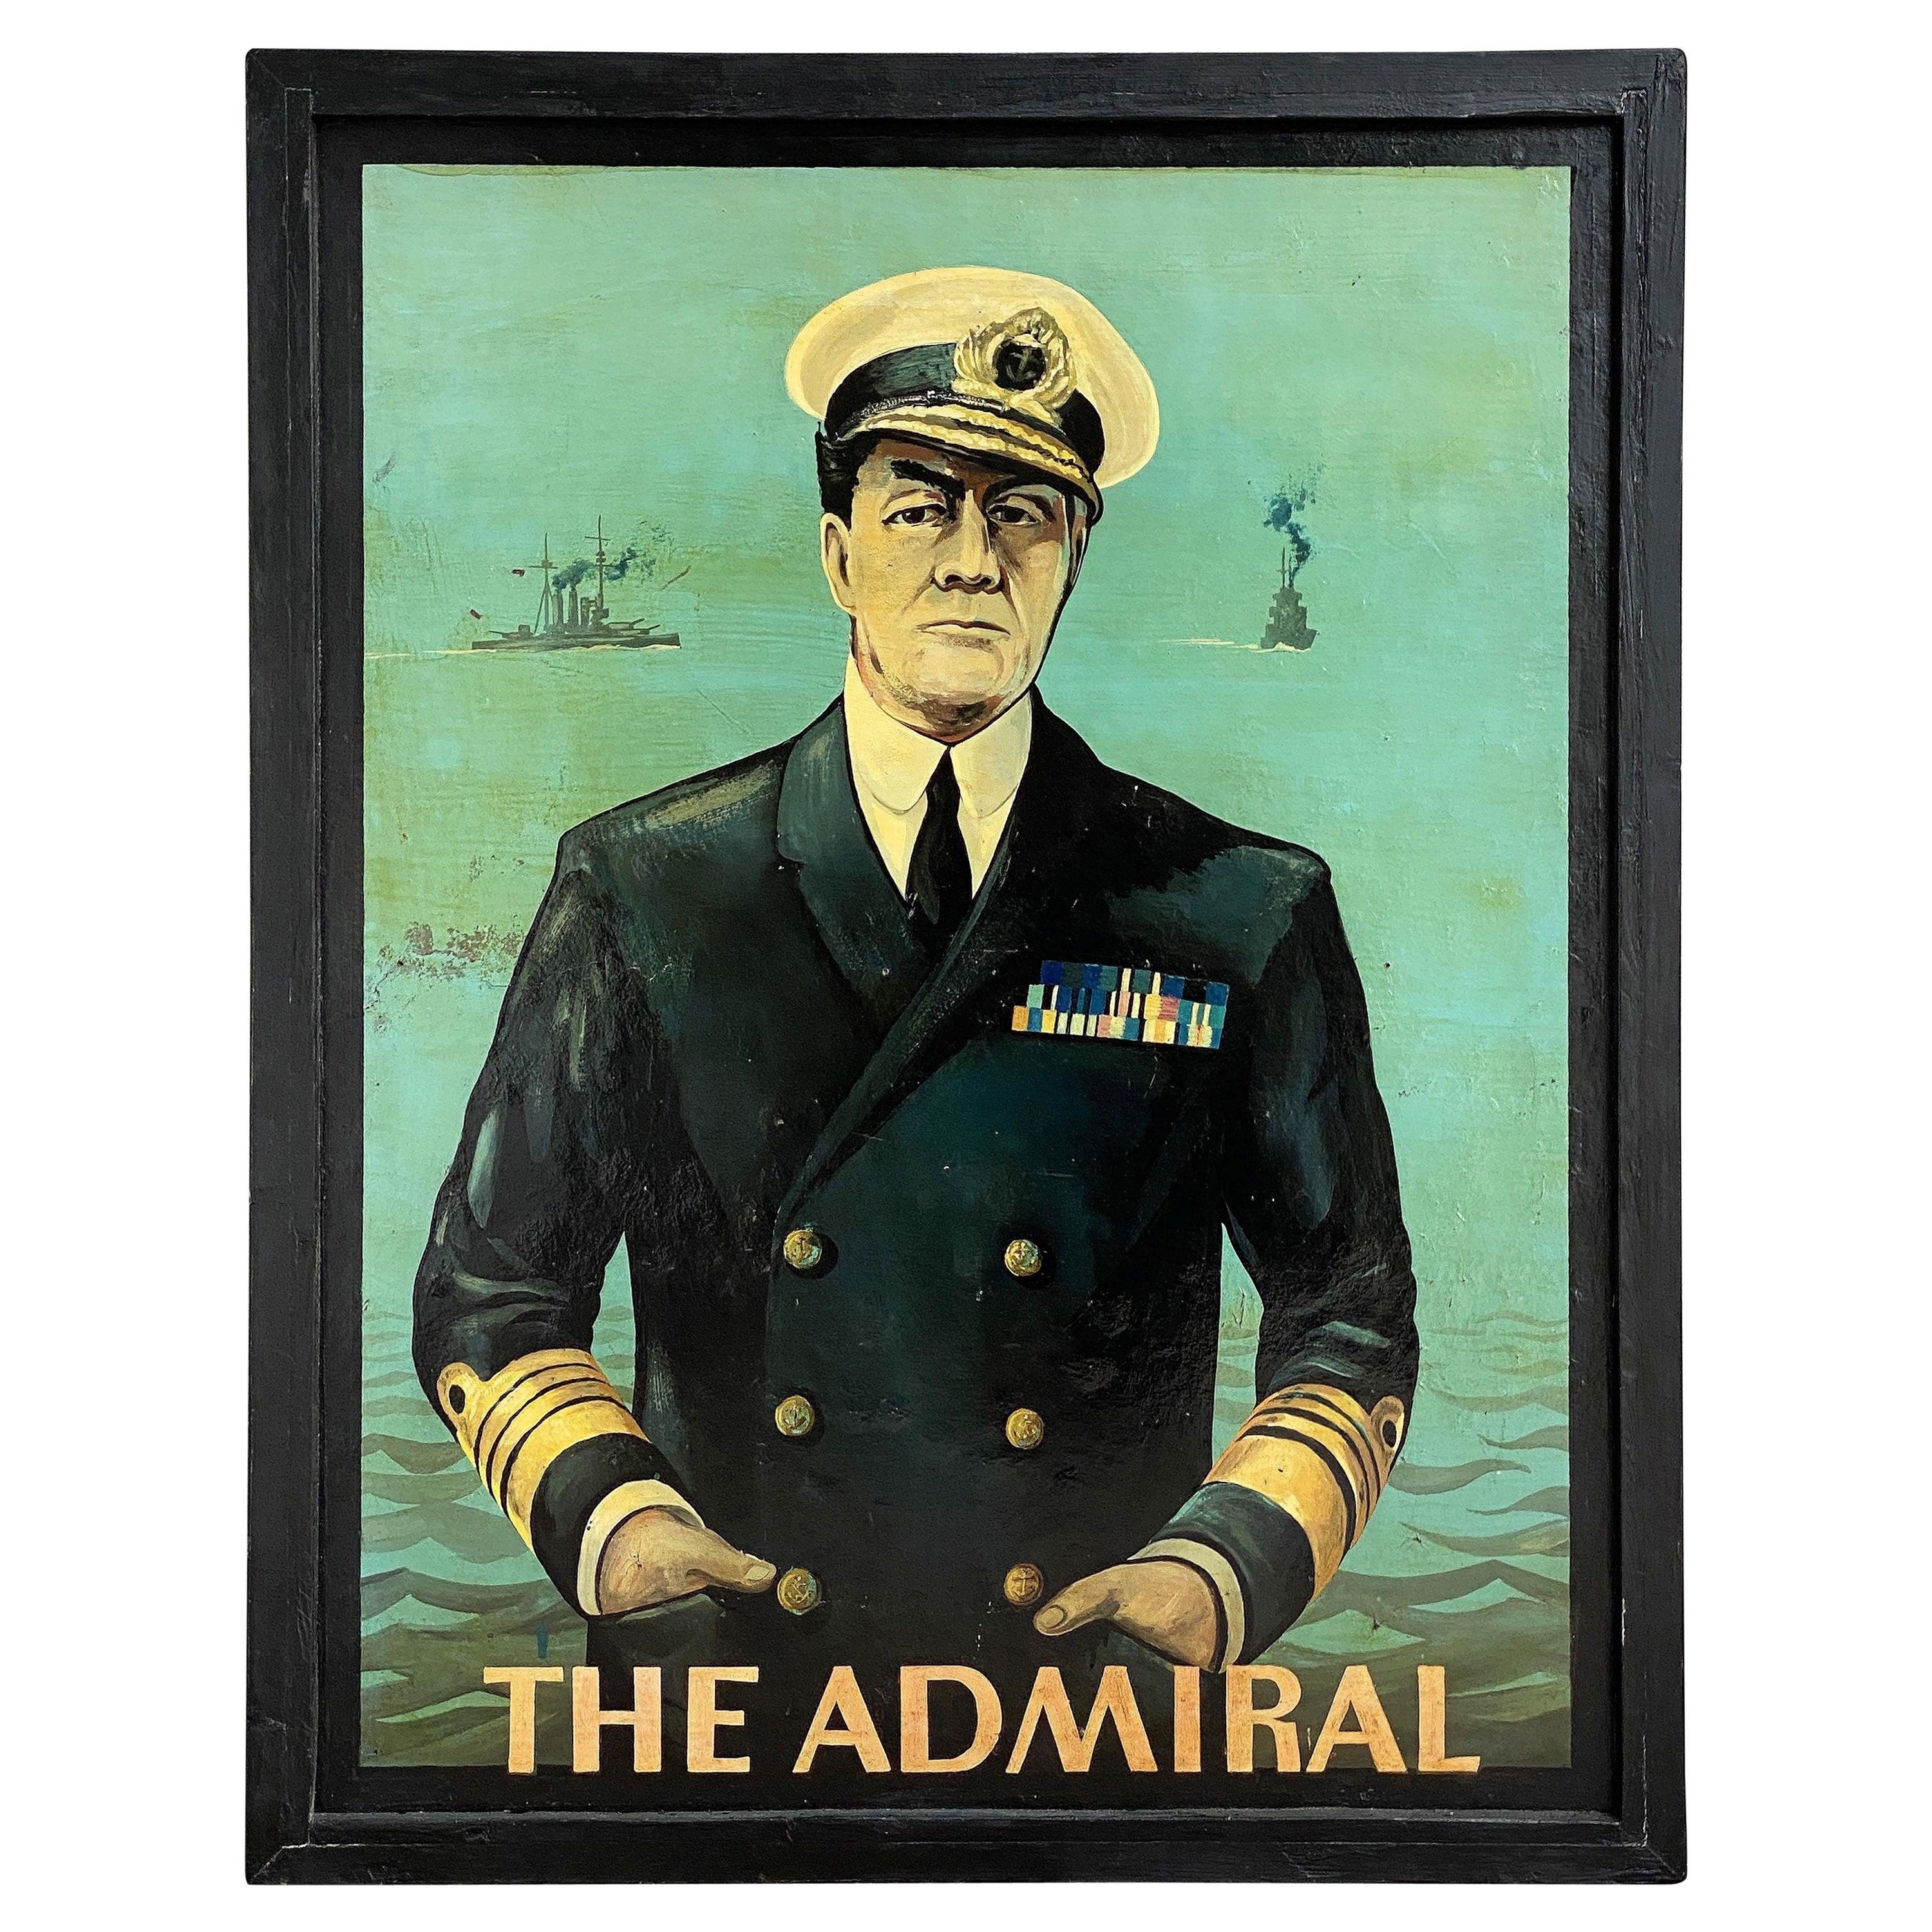 English Pub Sign, "The Admiral" For Sale